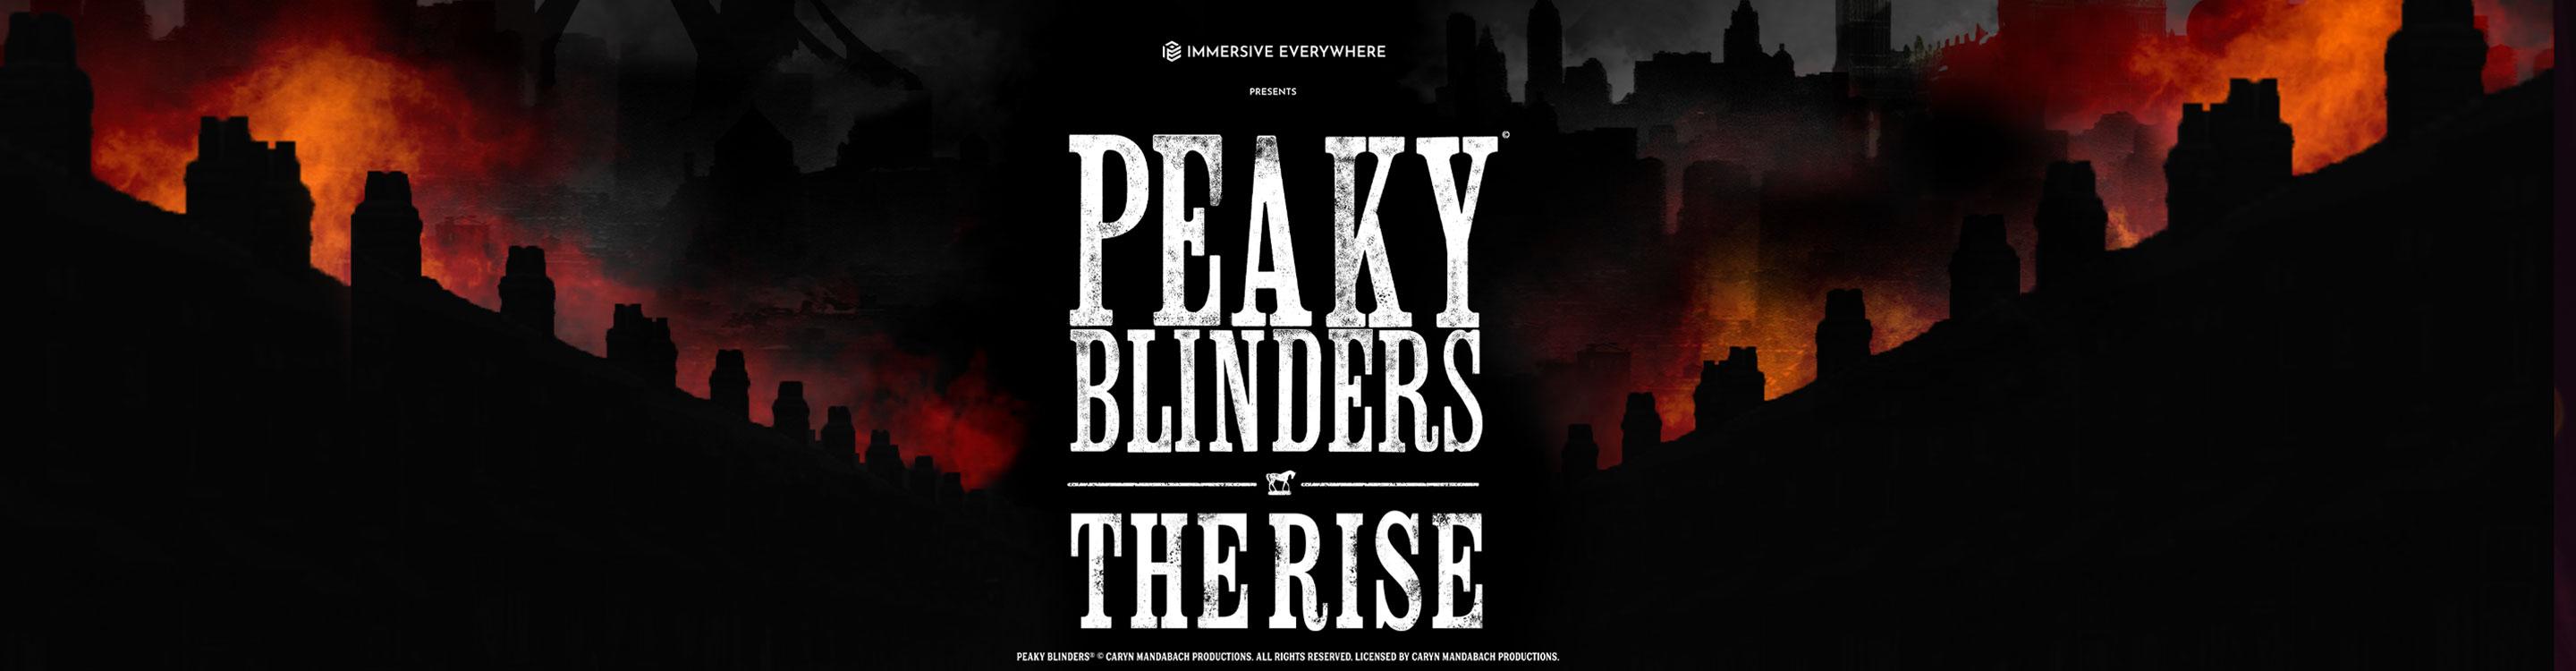 Promotional poster for the Peaky Blinders: The Rise immersive experience in London